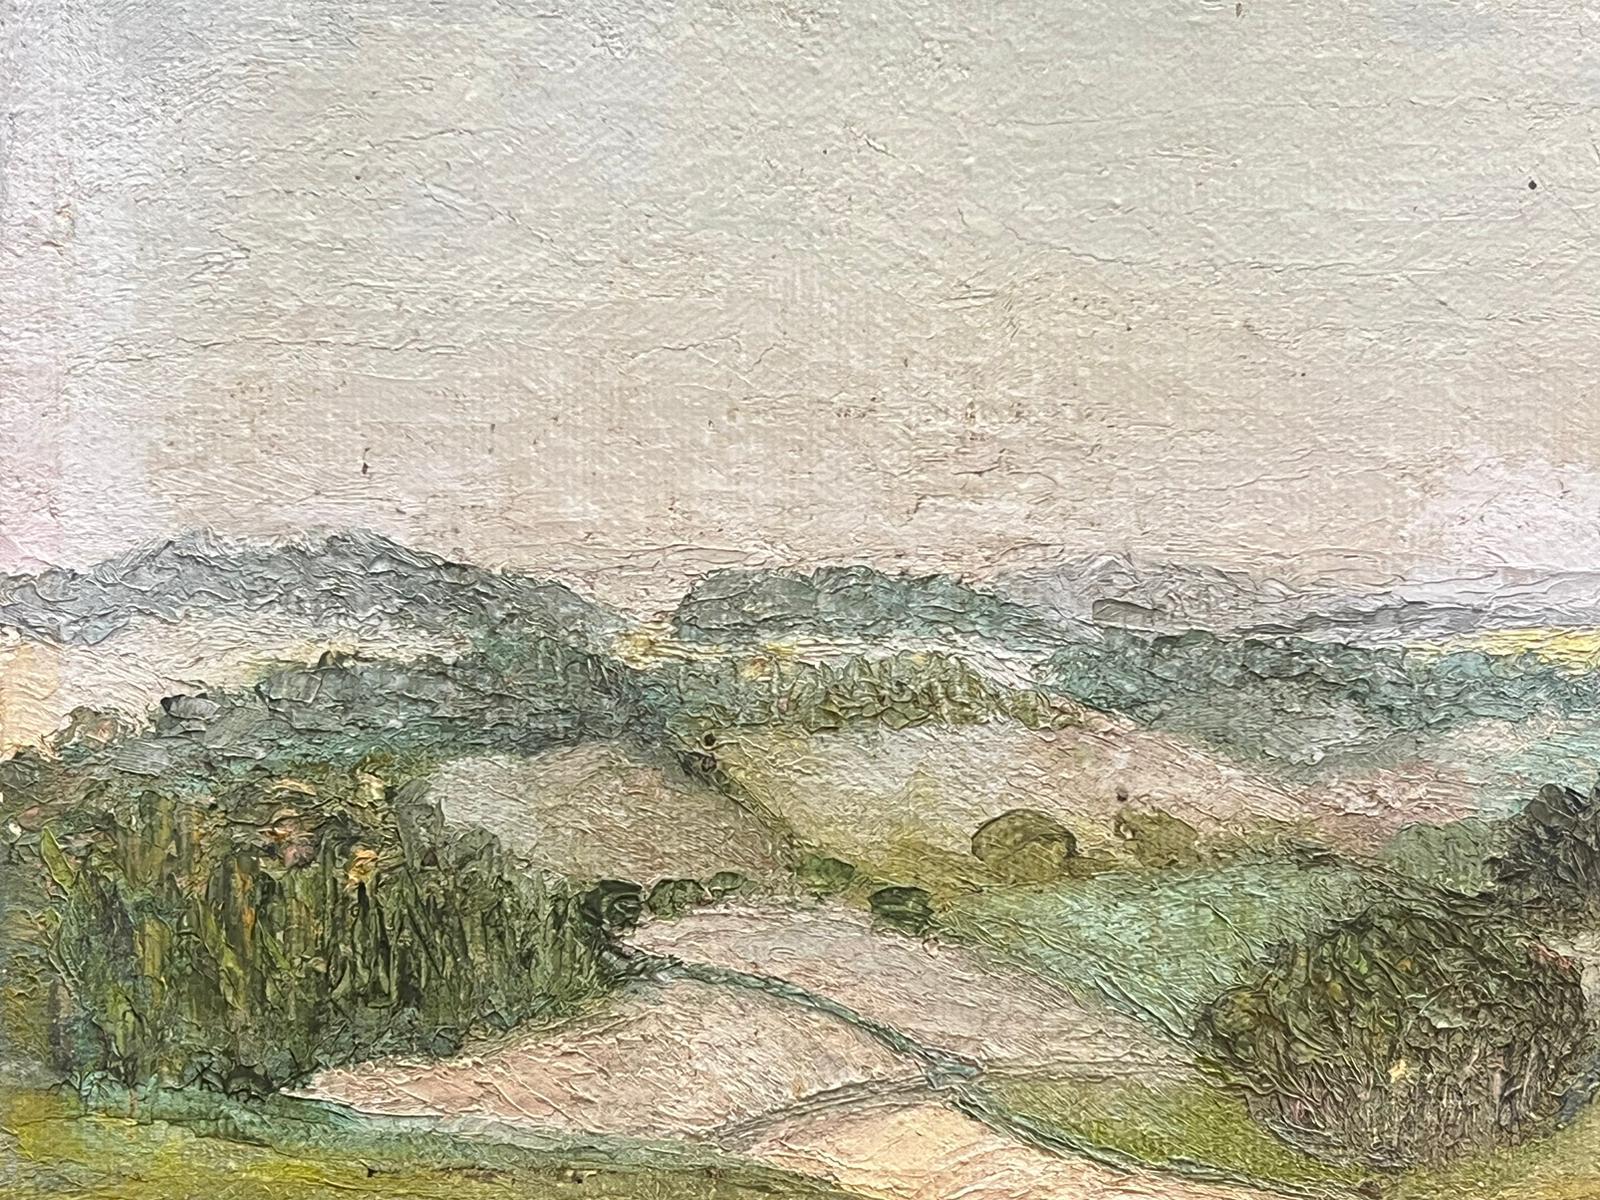 Landscape 
signed by Geza Somerset-Paddon (British 20th century)
dated 78'
oil painting on board, unframed
size: 7 x 10 inches
inscribed verso
condition: overall very good
provenance: all the paintings we have by this artist have come from their